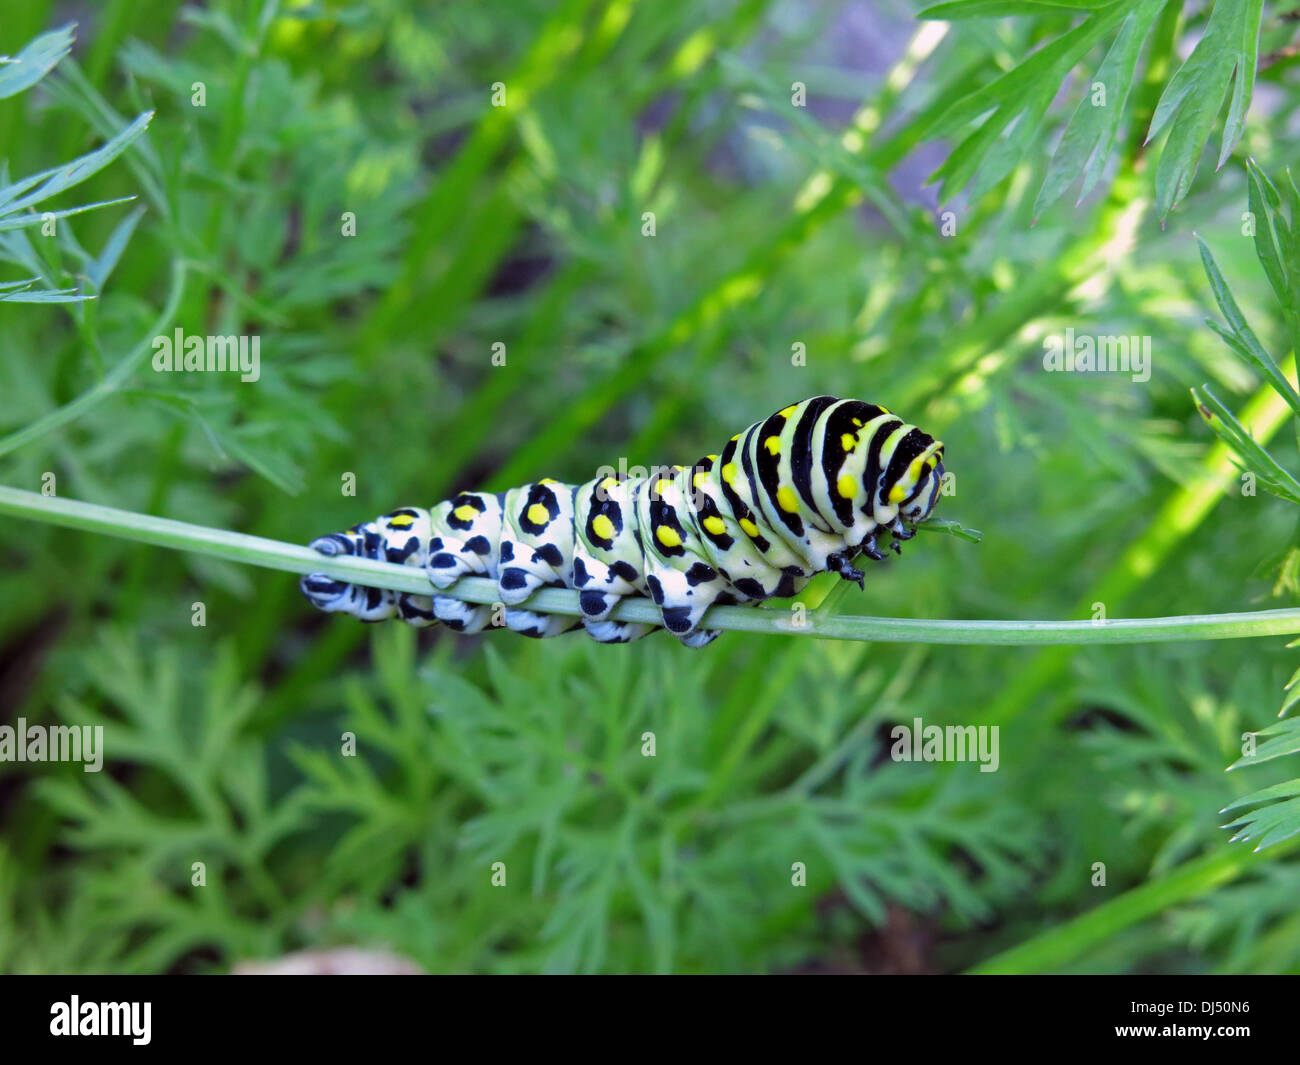 insect caterpillar butterfly tiger swallowtail eating carrot greens Stock Photo